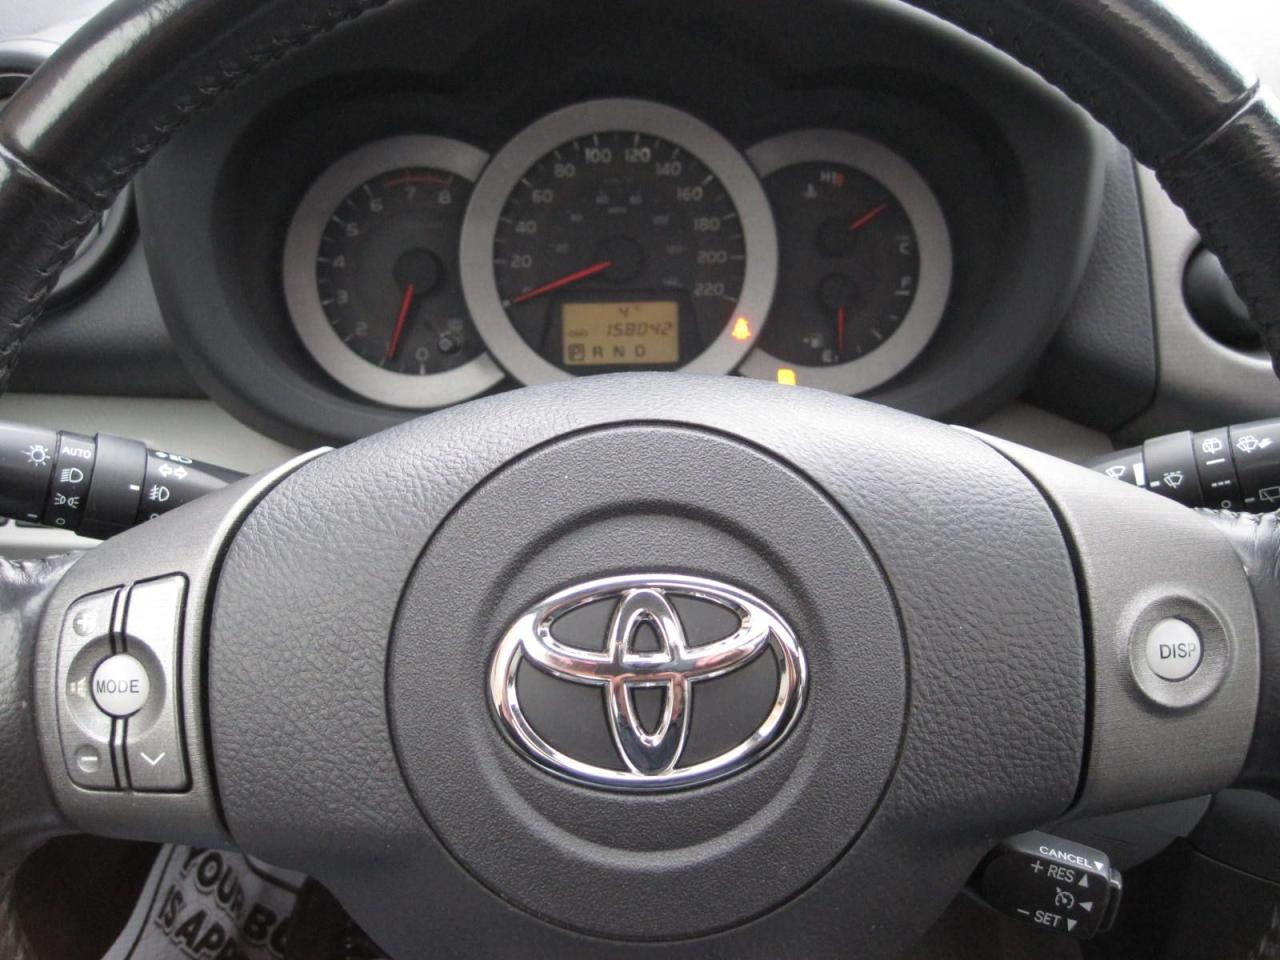 2009 Toyota RAV4 LIMITED - 1 LOCAL OWNER! NO CLAIMS! - Photo #18